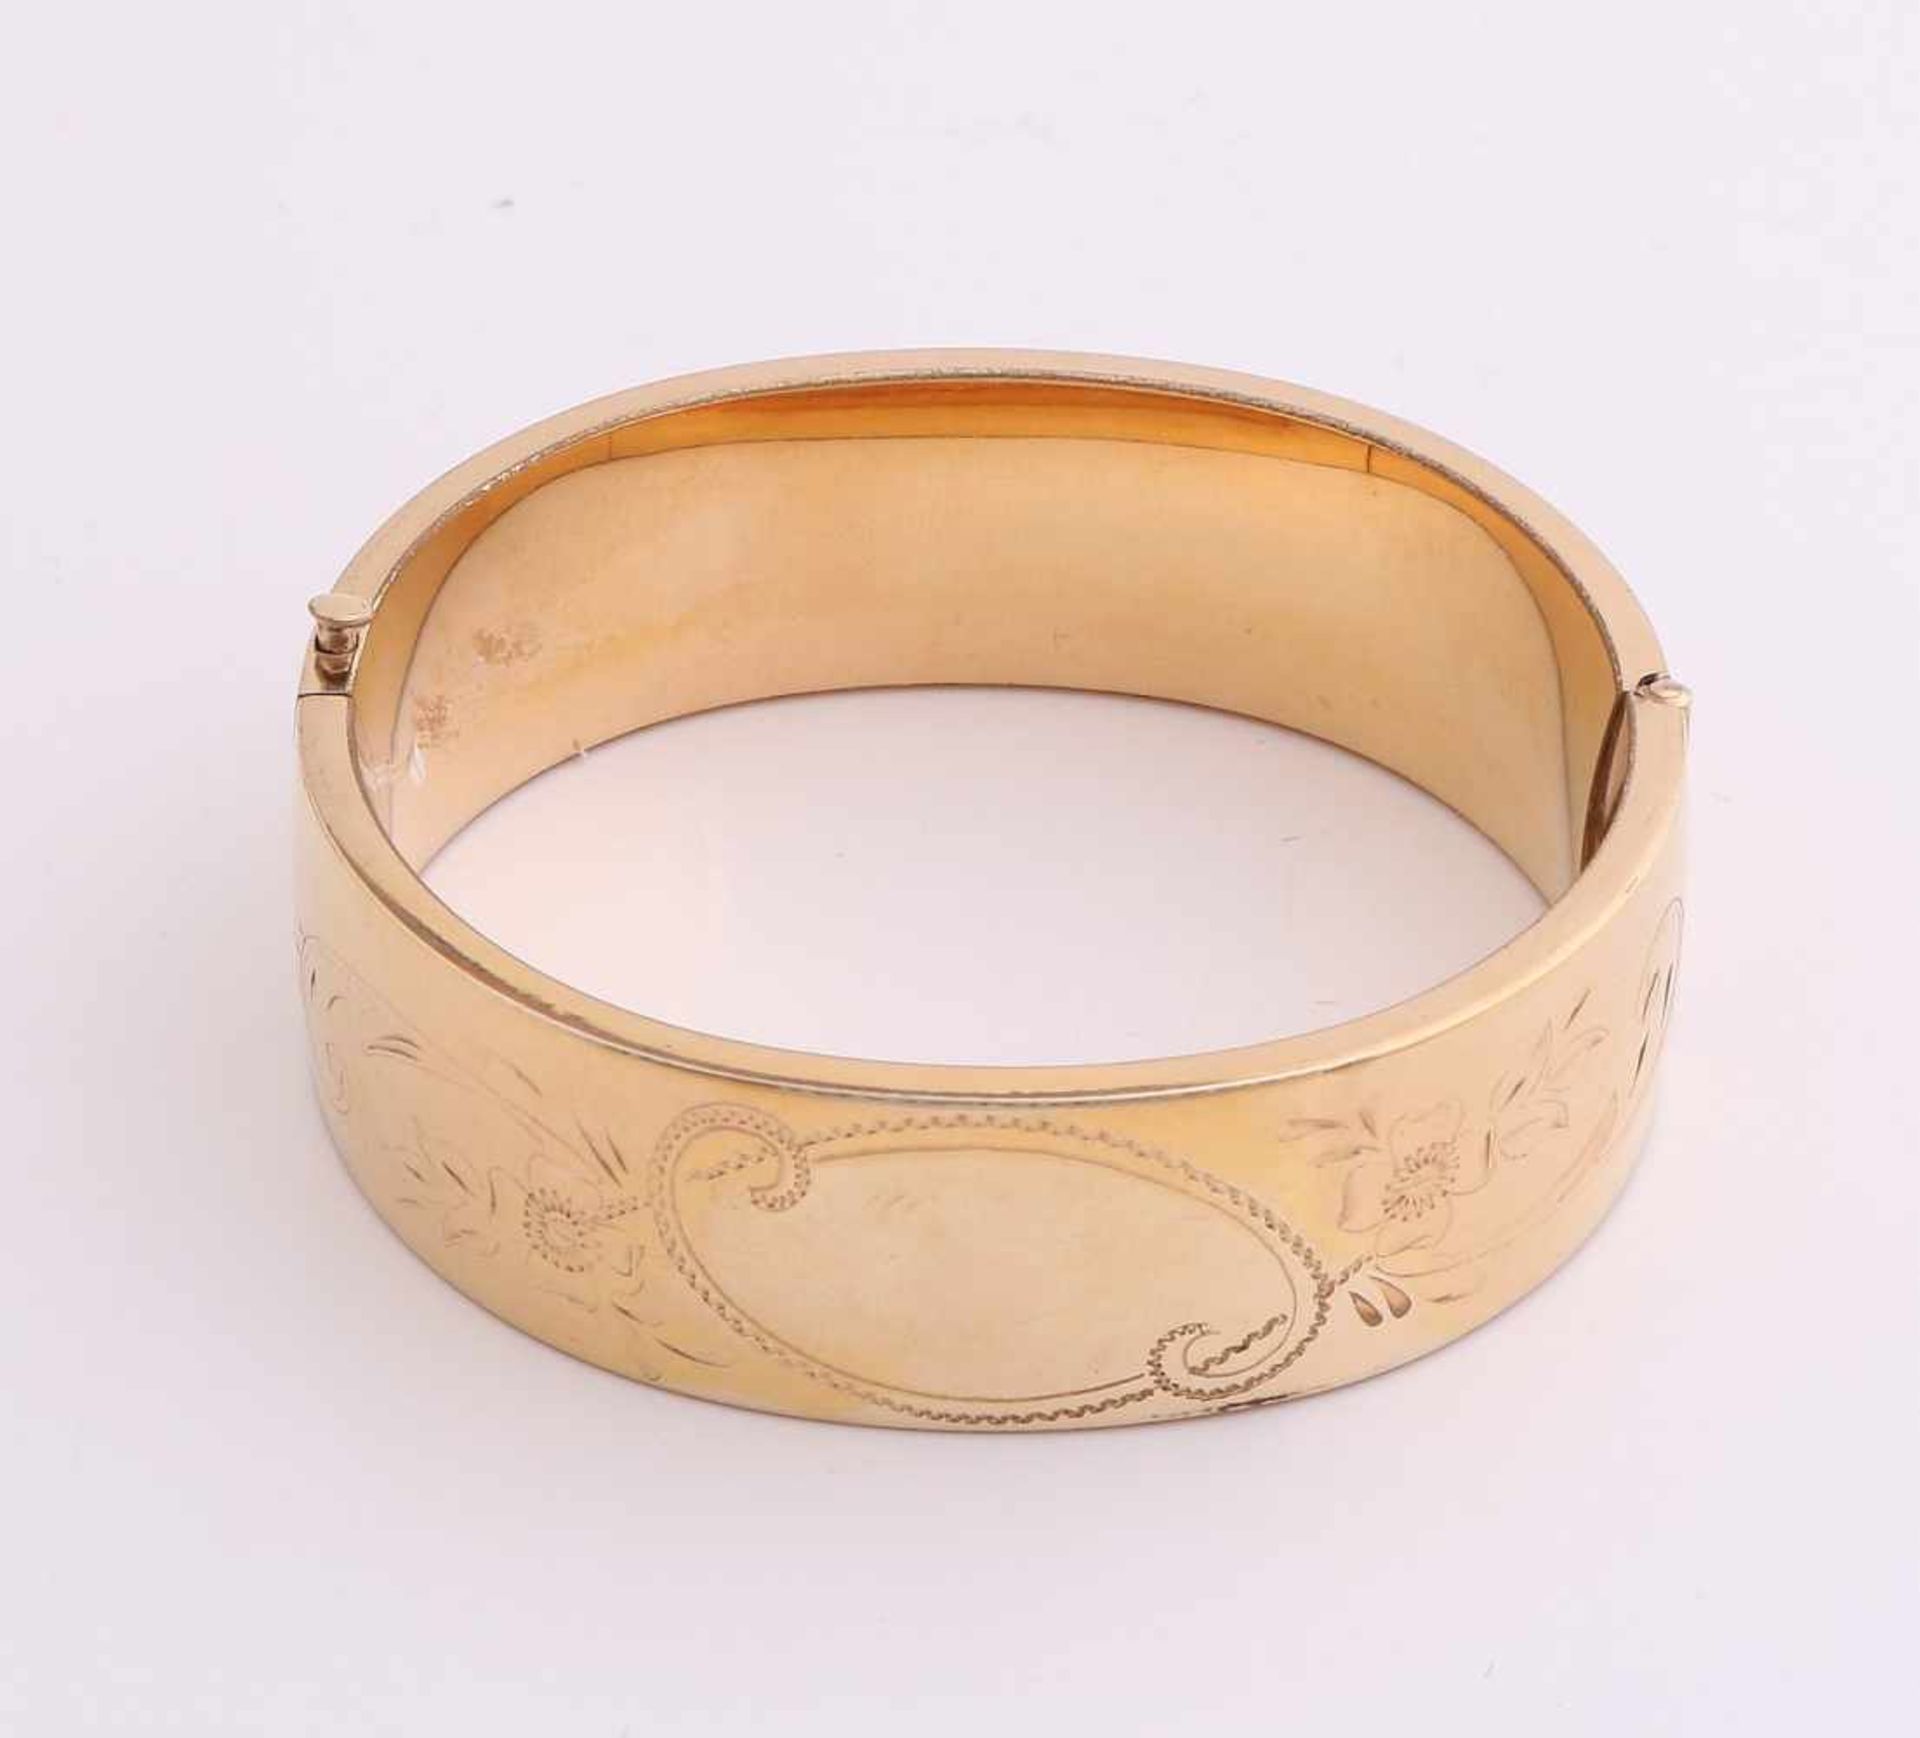 Heavy goldplated slaves band, wide model, 19mm, on the upper side provided with carvings. Equipped